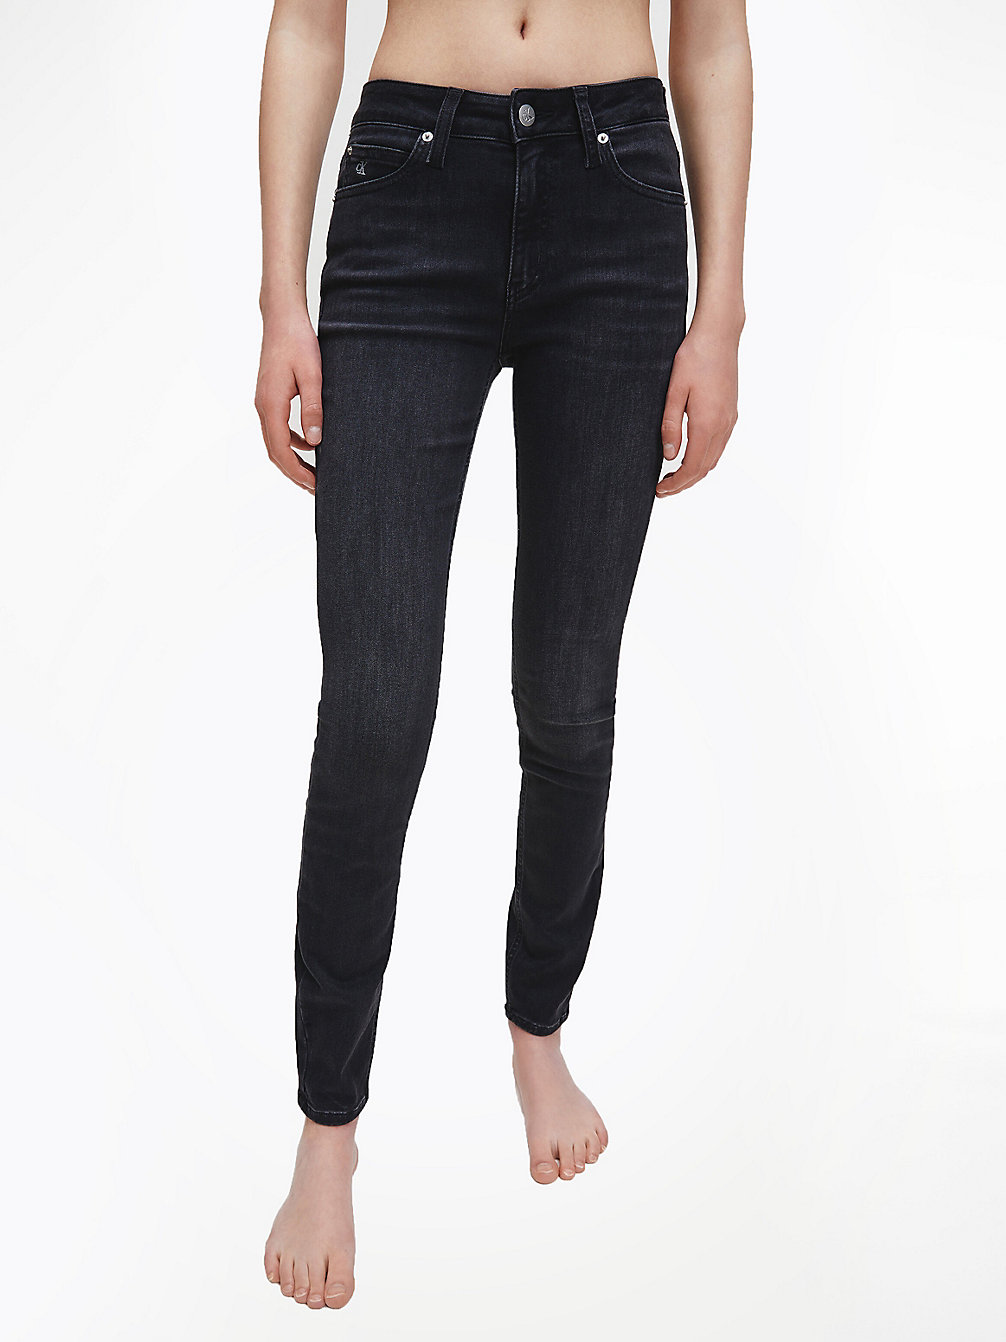 ZZ002 WASHED BLACK Mid Rise Skinny Jeans undefined women Calvin Klein